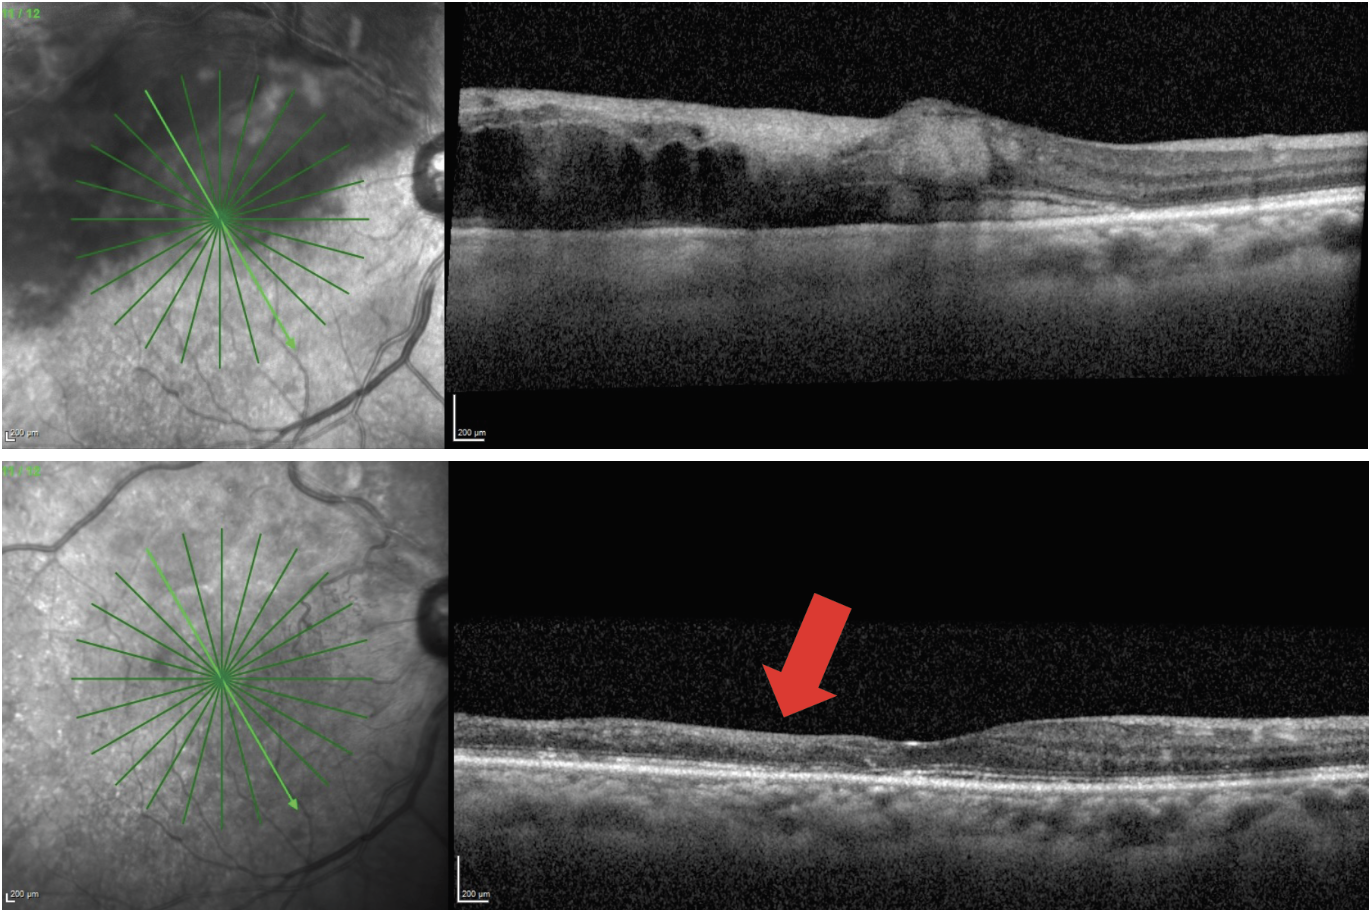 Fig. 2. A 68-year-old male patient presented with macular edema secondary to branch RVO and visual acuity of 20/80 (top). The patient had four monthly Avastin injections, which resulted in complete resolution of the macular edema (bottom). The patient’s visual acuity improved to 20/50 but was limited by the severity of macular ischemia that is evident from the significant inner retinal thinning (red arrow).